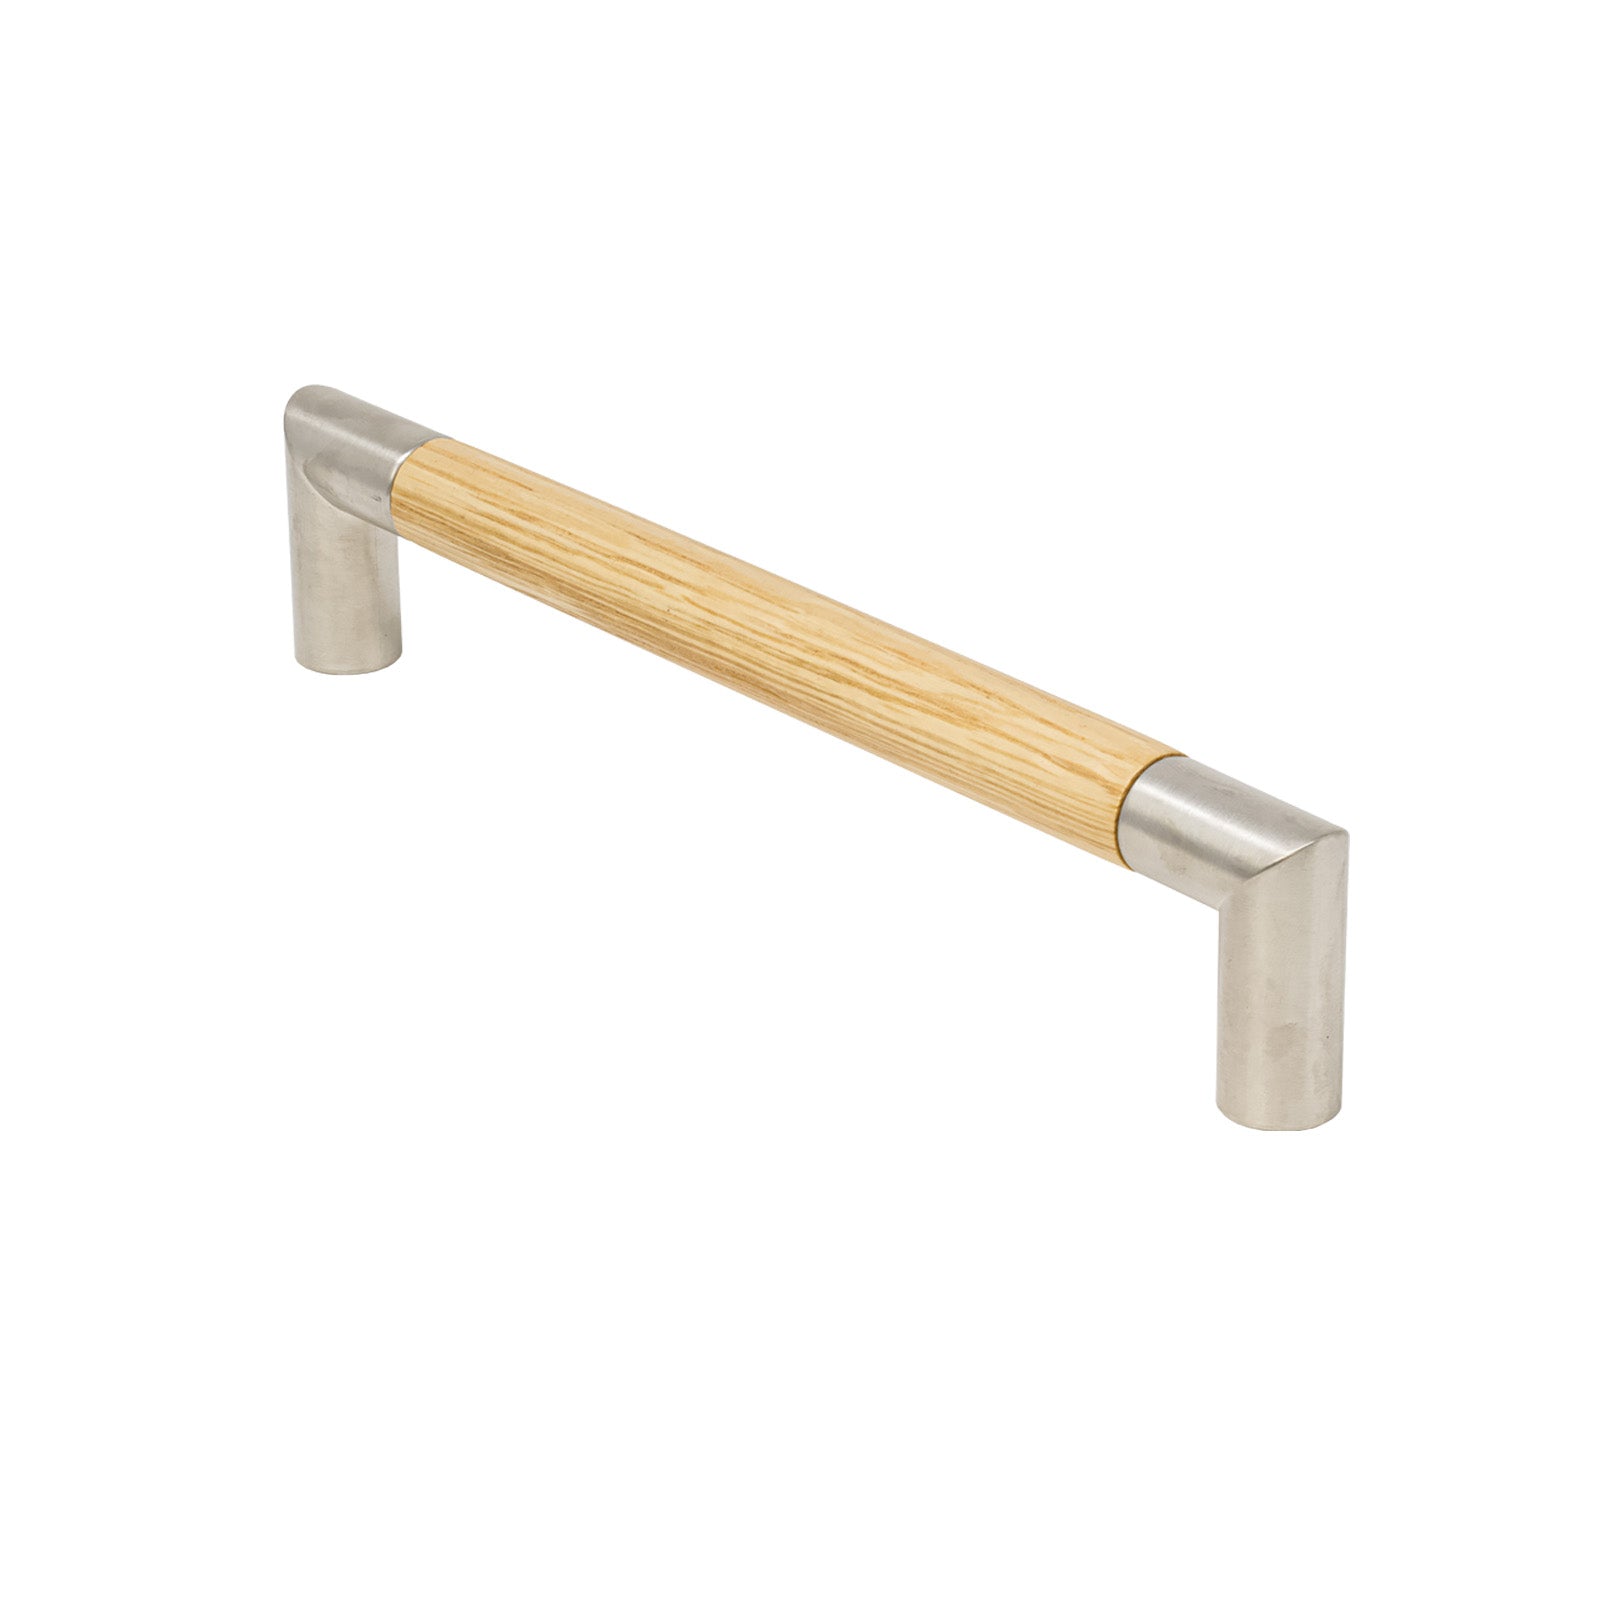 SHOW Angle Cabinet Pull Handle in Oak finish